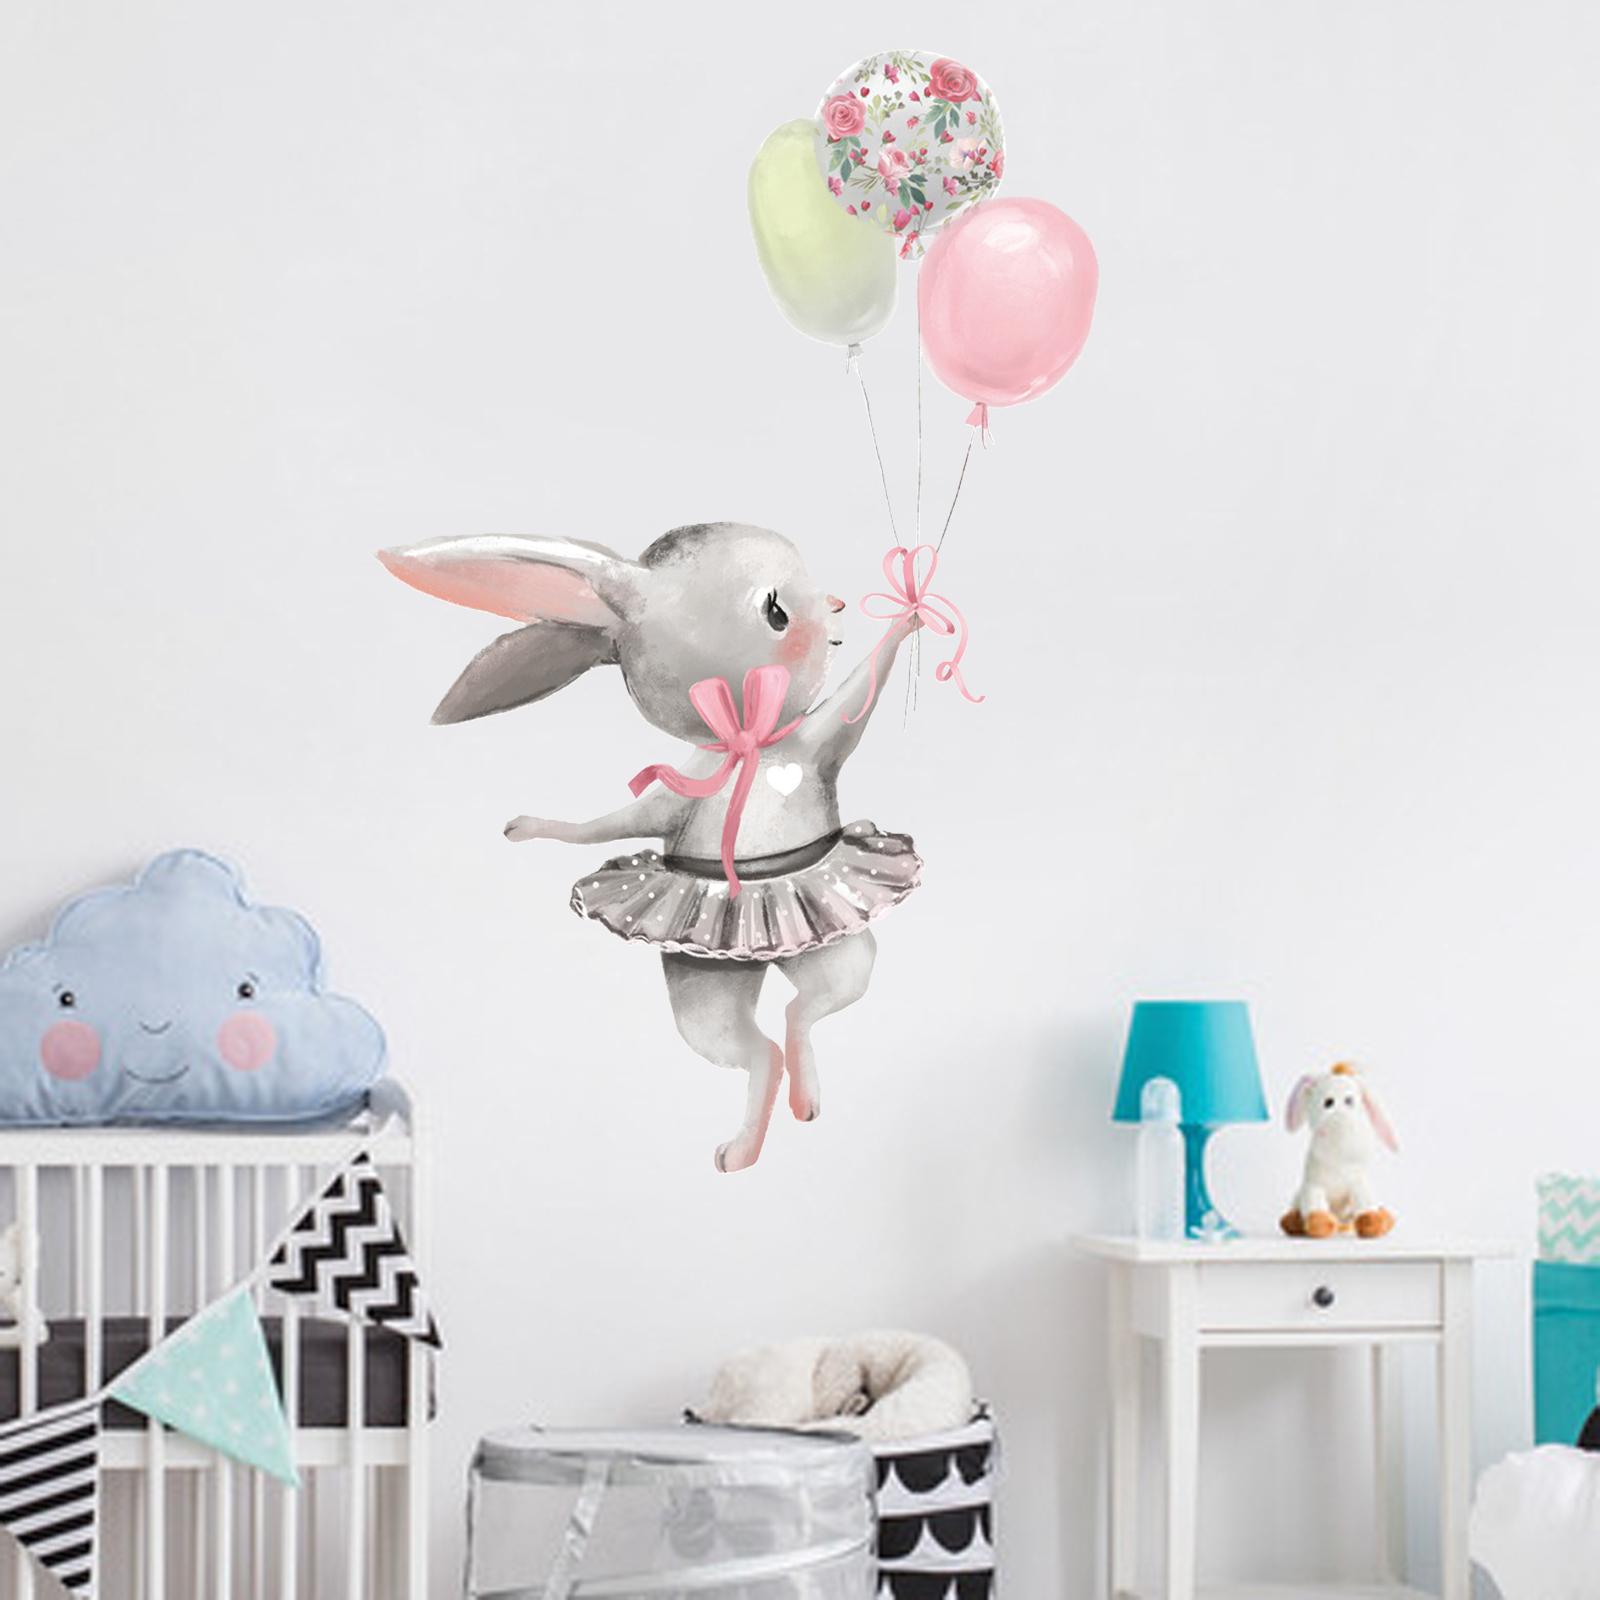 Bunny Ballet Rabbit Wall Stickers for Kids Room Nursery Wall Decal Wallpaper